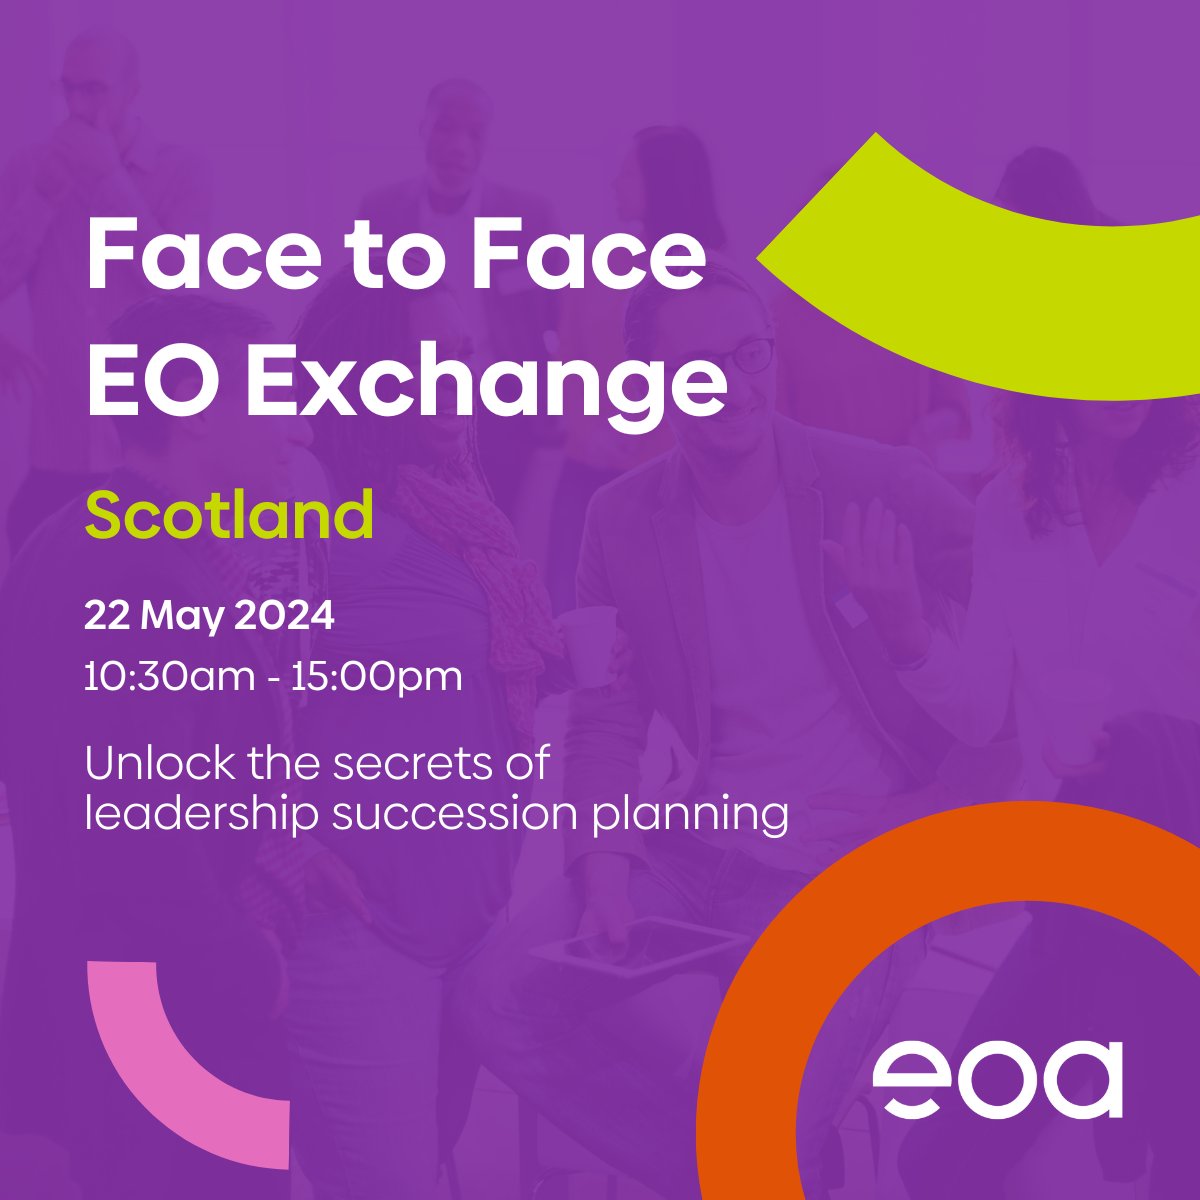 Book your place at @EmployeeOwned's Face to Face EO Exchange event in Scotland on Wed 22 May at @scotent's Edinburgh office. A chance to network with others in the sector. ow.ly/T7bM50RzeHq